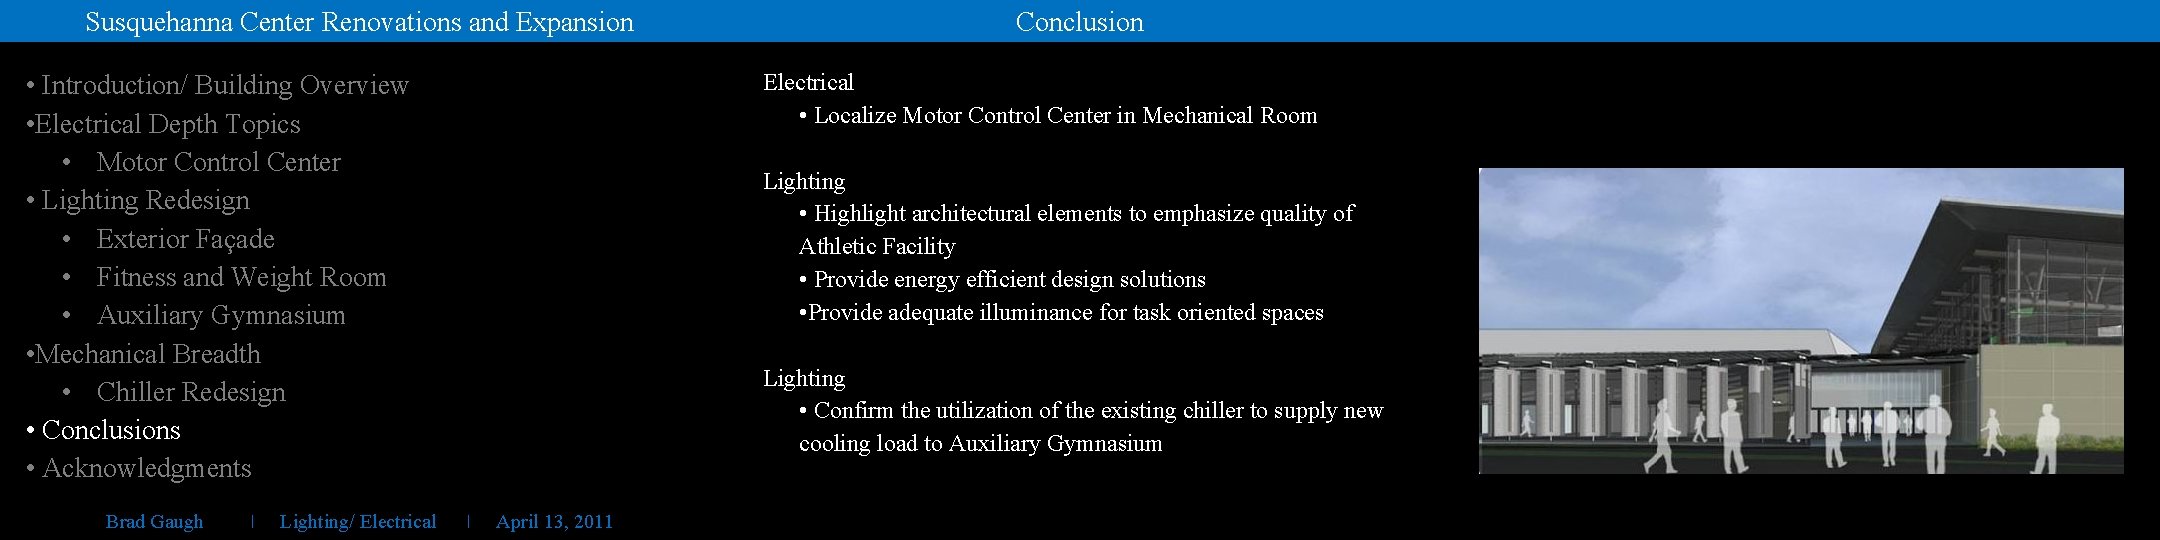 Susquehanna Center Renovations and Expansion • Introduction/ Building Overview • Electrical Depth Topics •